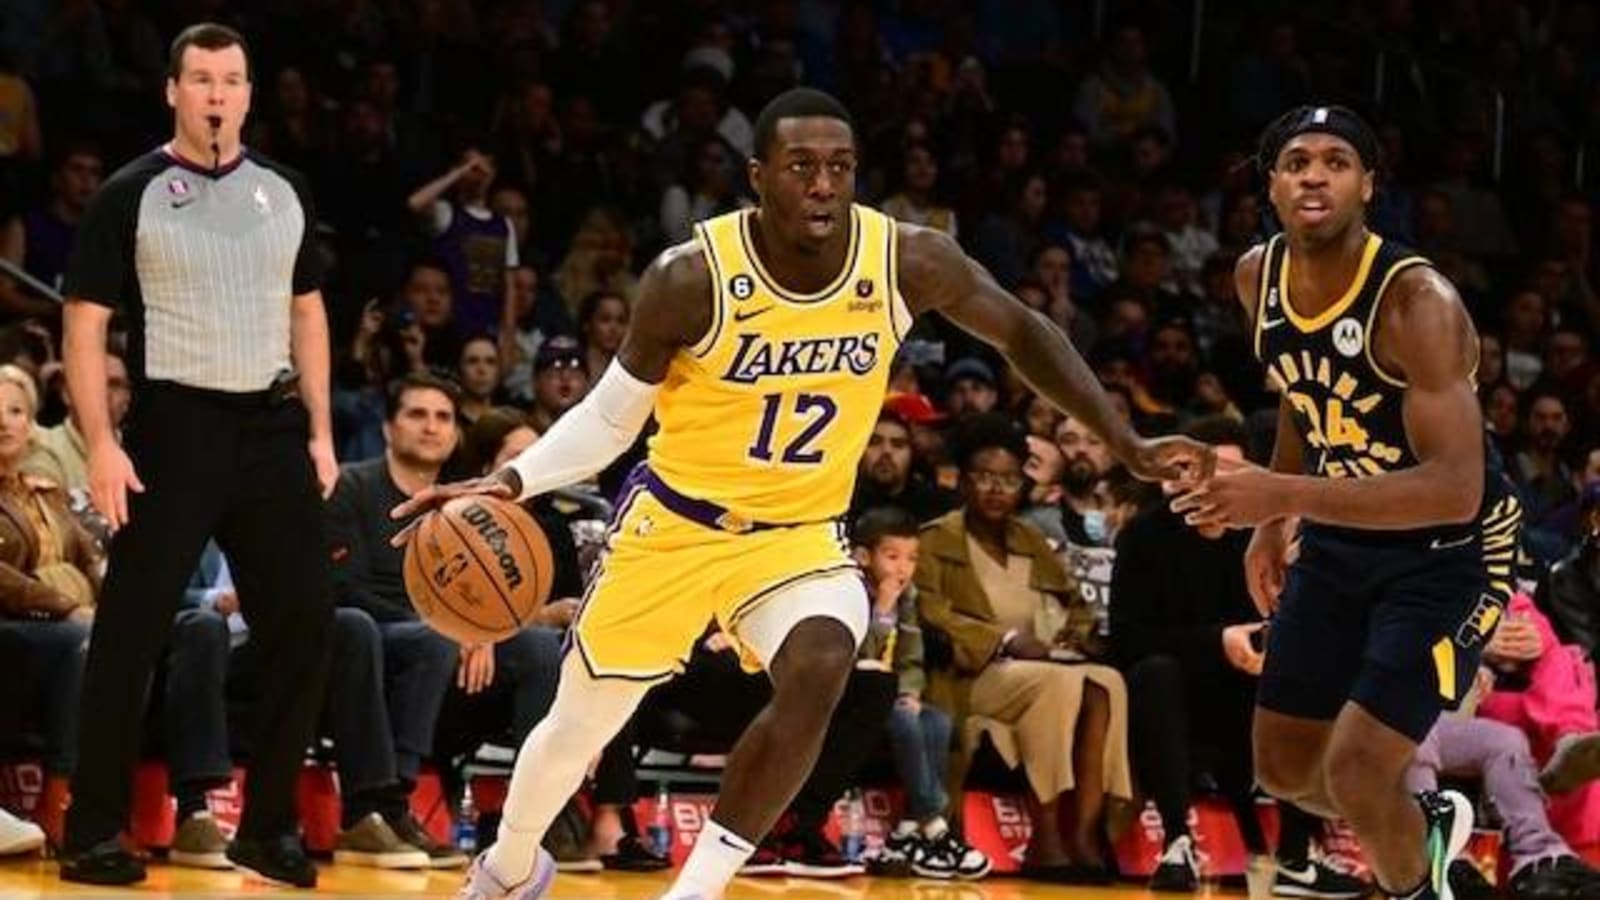 Kendrick Nunn Insists He Is ‘Ready’ To Make An Impact For Lakers If Given More Opportunities